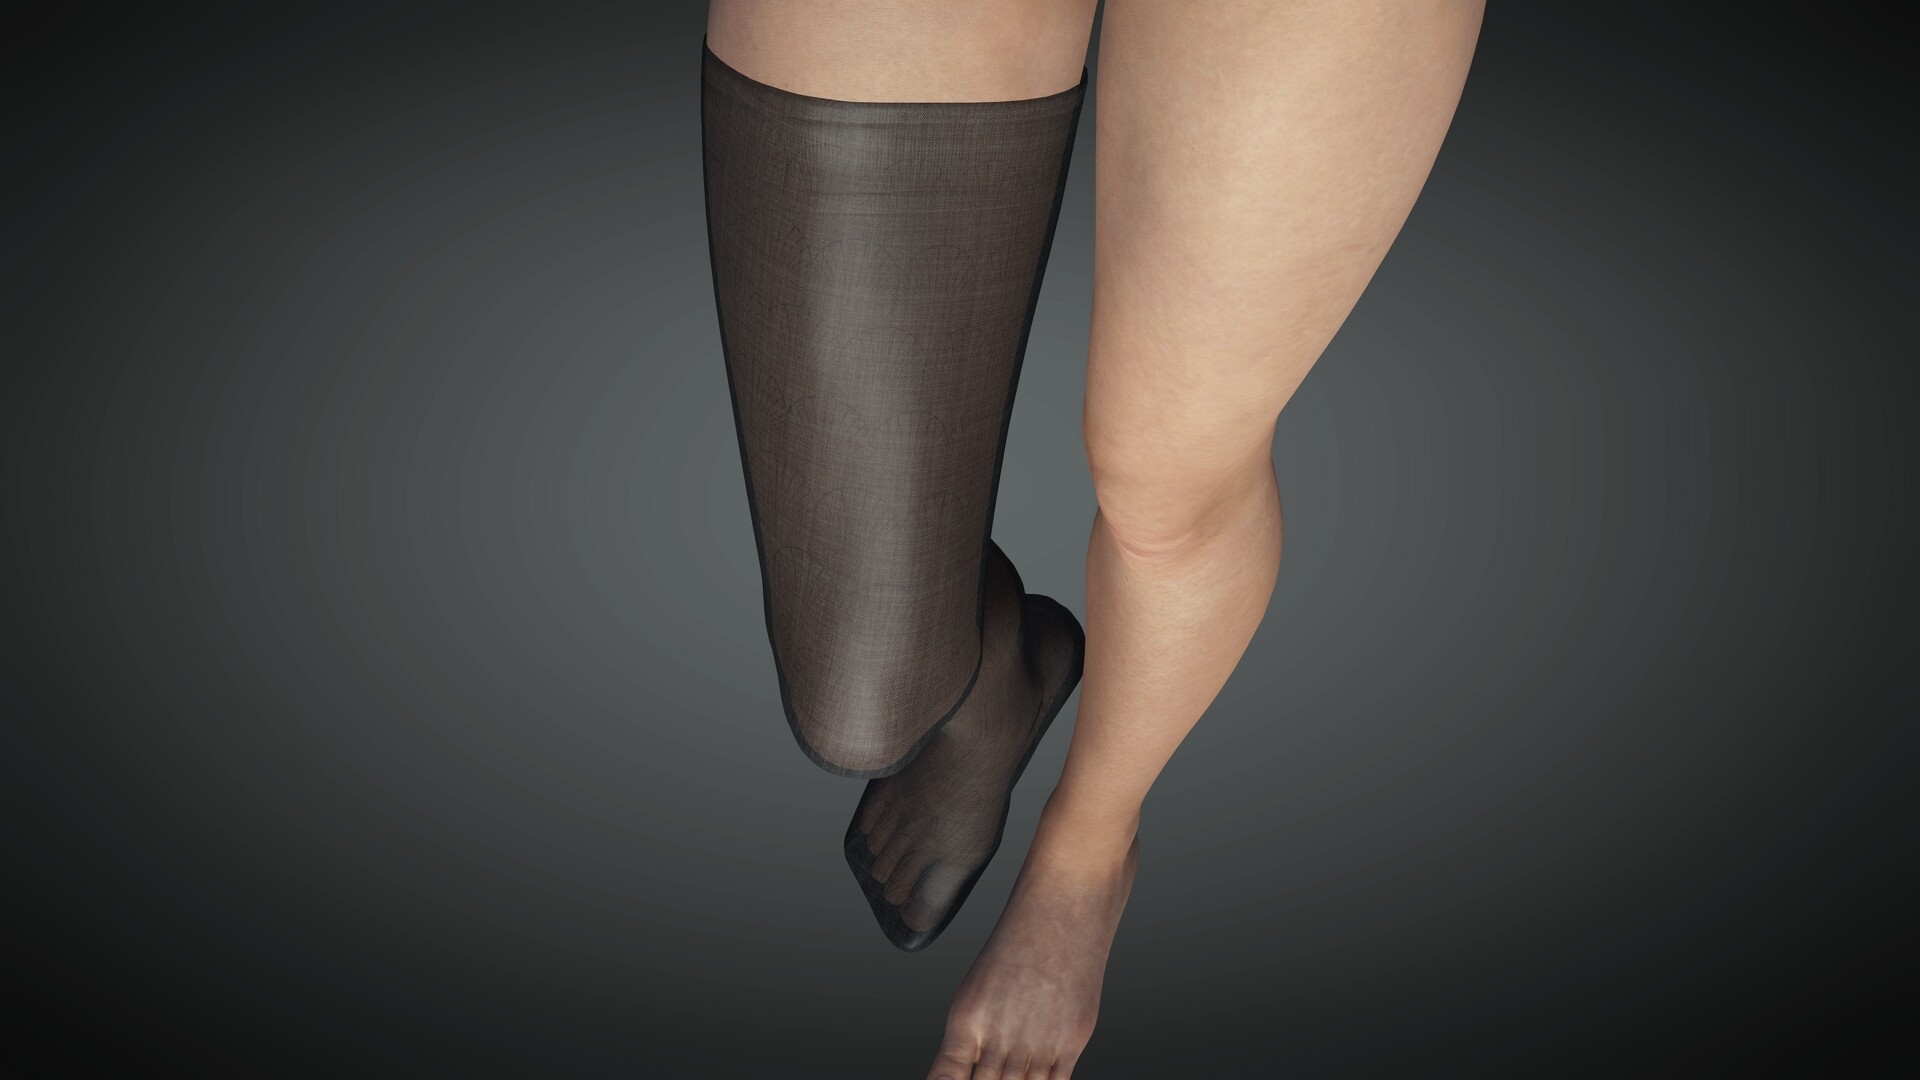 49,343 Pantyhose Images, Stock Photos, 3D objects, & Vectors